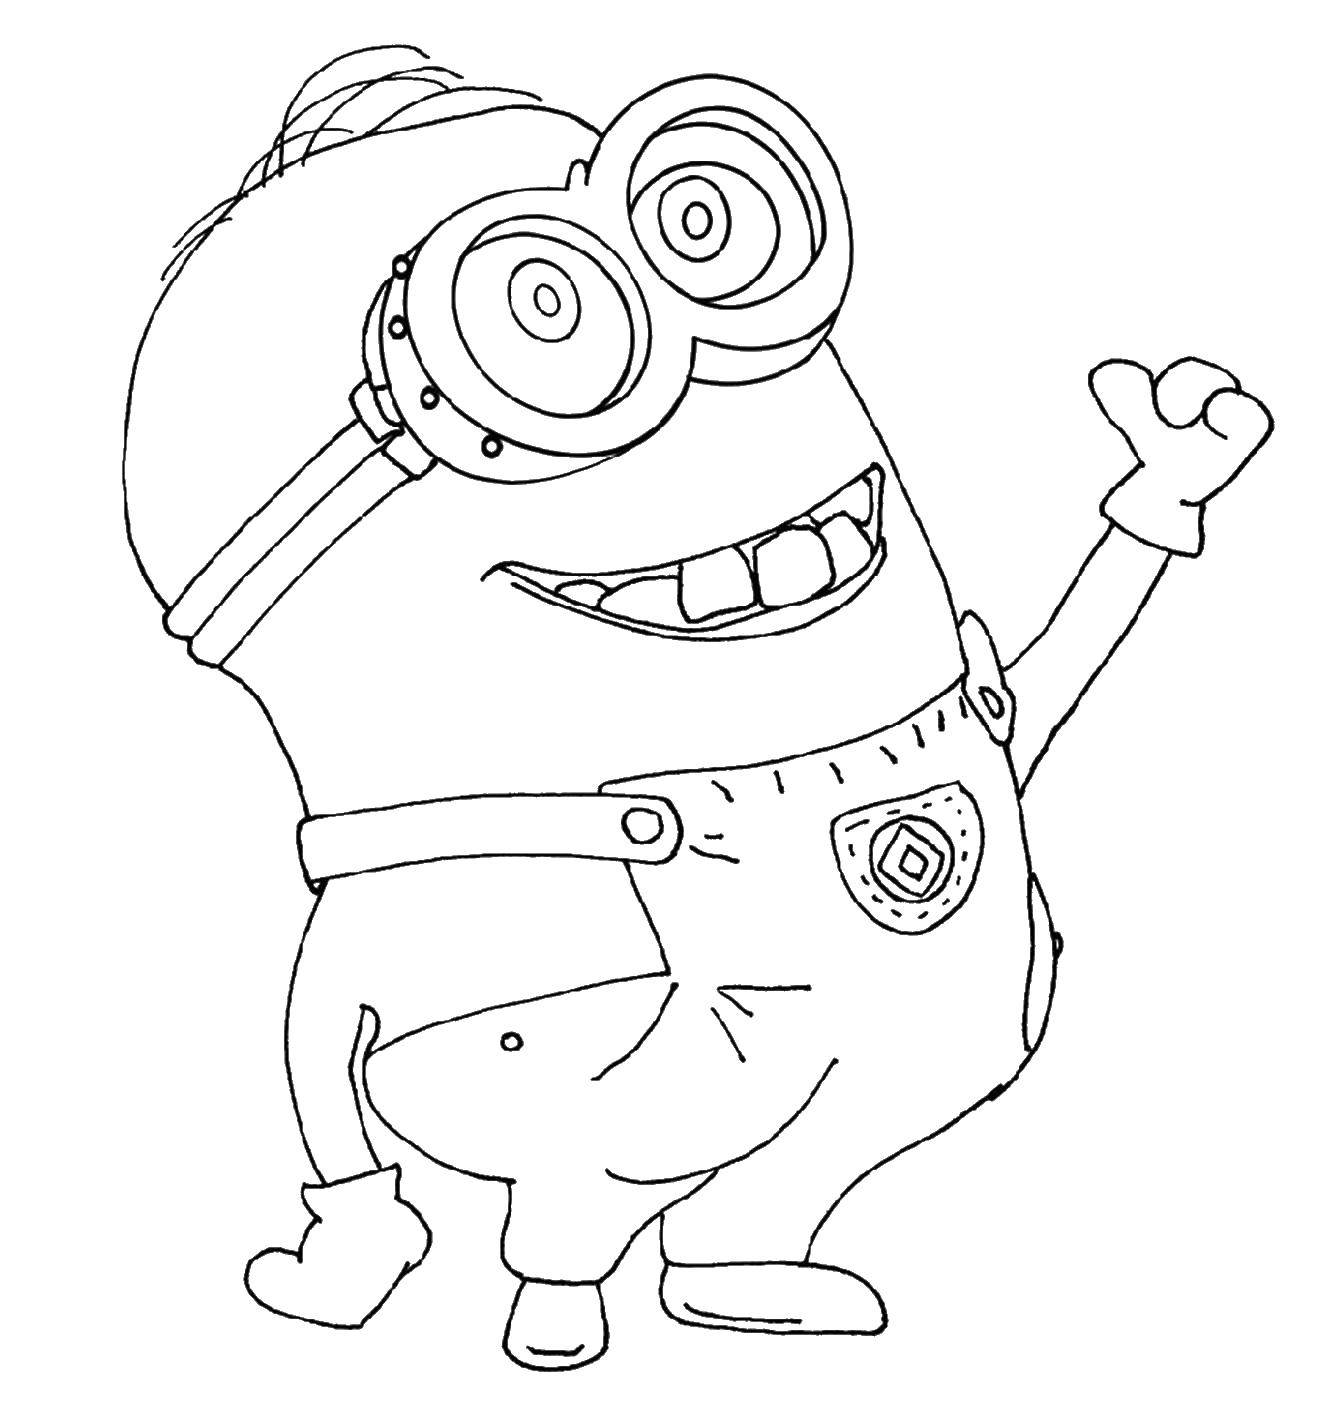 Coloring Minion approves. Category the minions. Tags:  Cartoon character.